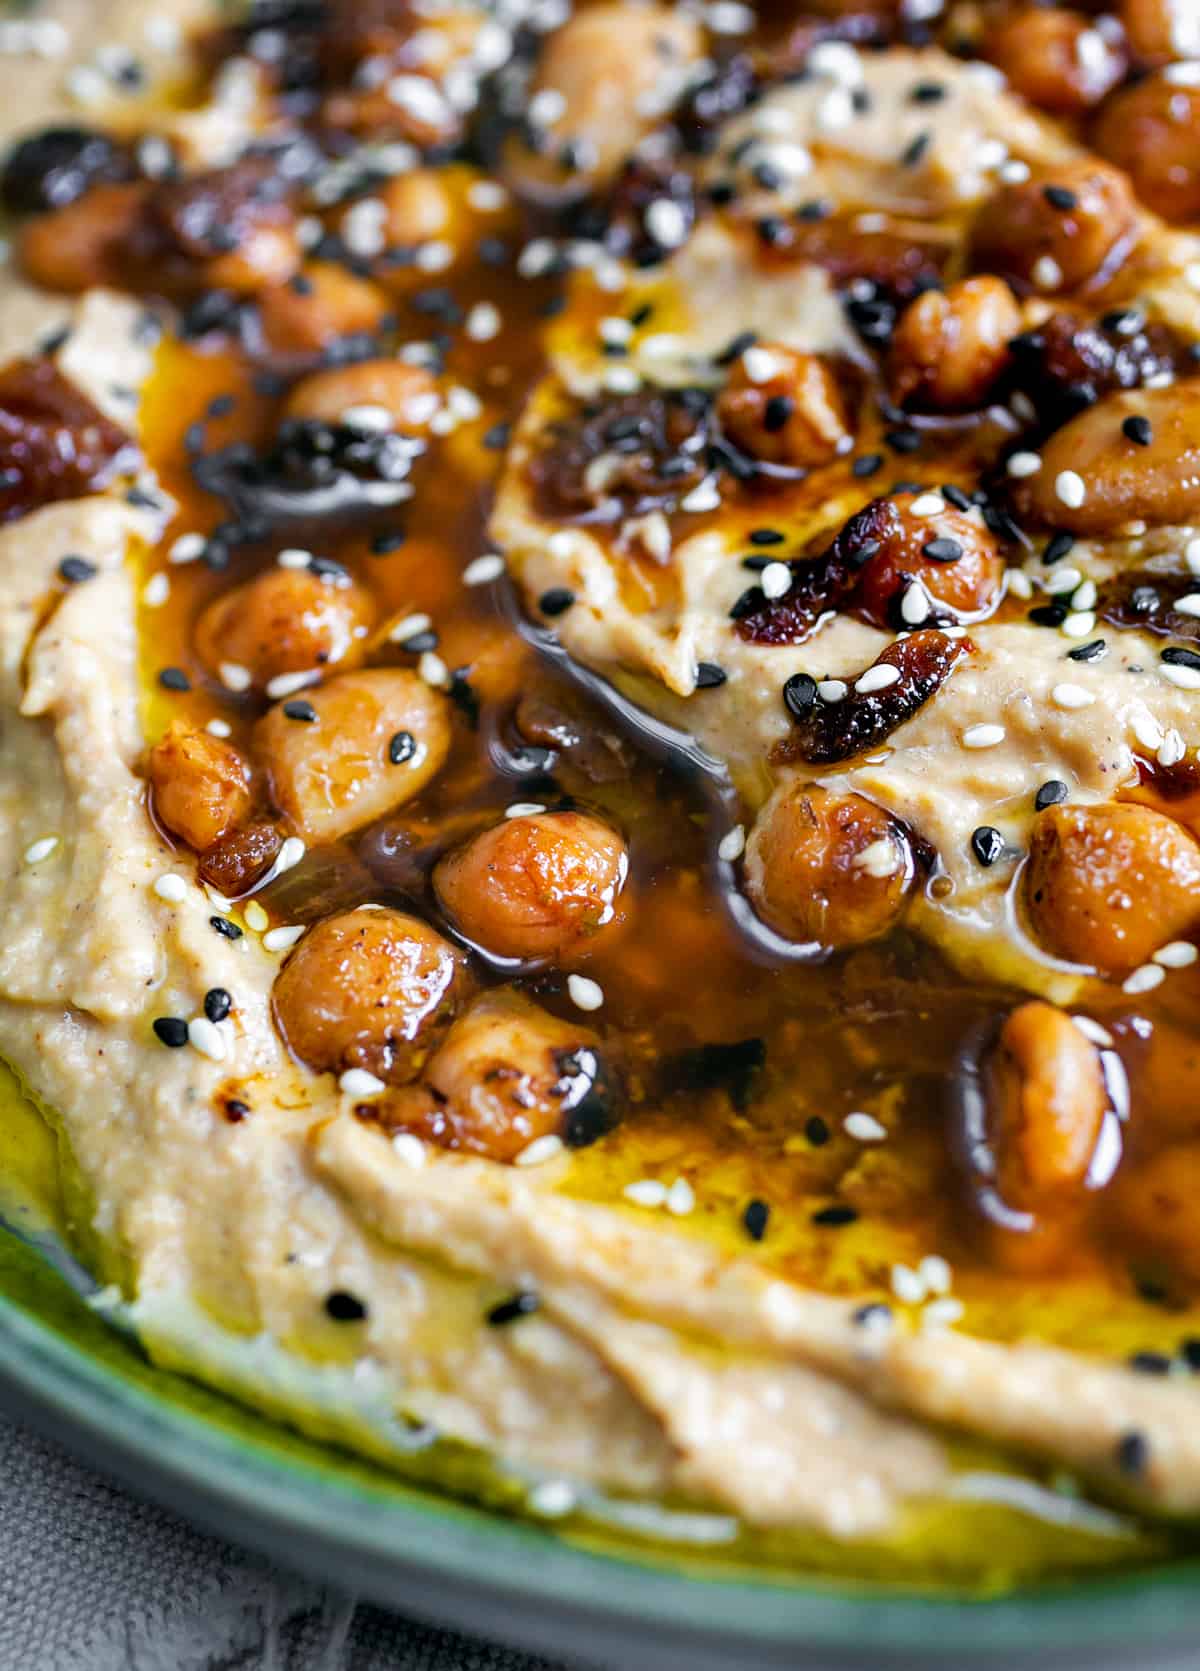 Hummus topped with beans, onions and oil